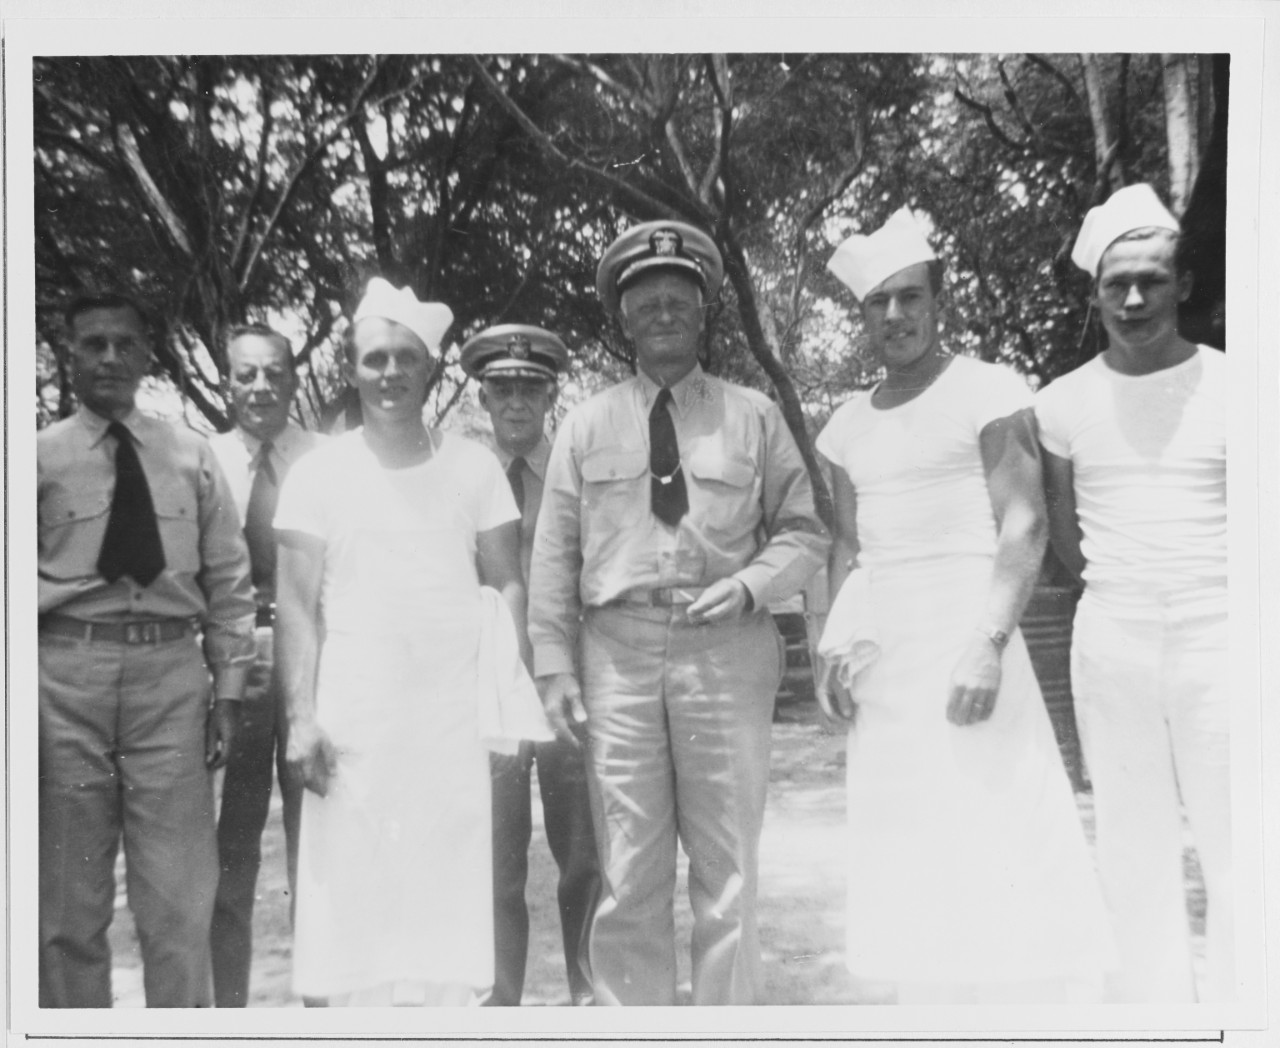 Admiral Nimitz Attends an Enlisted Men's Picnic